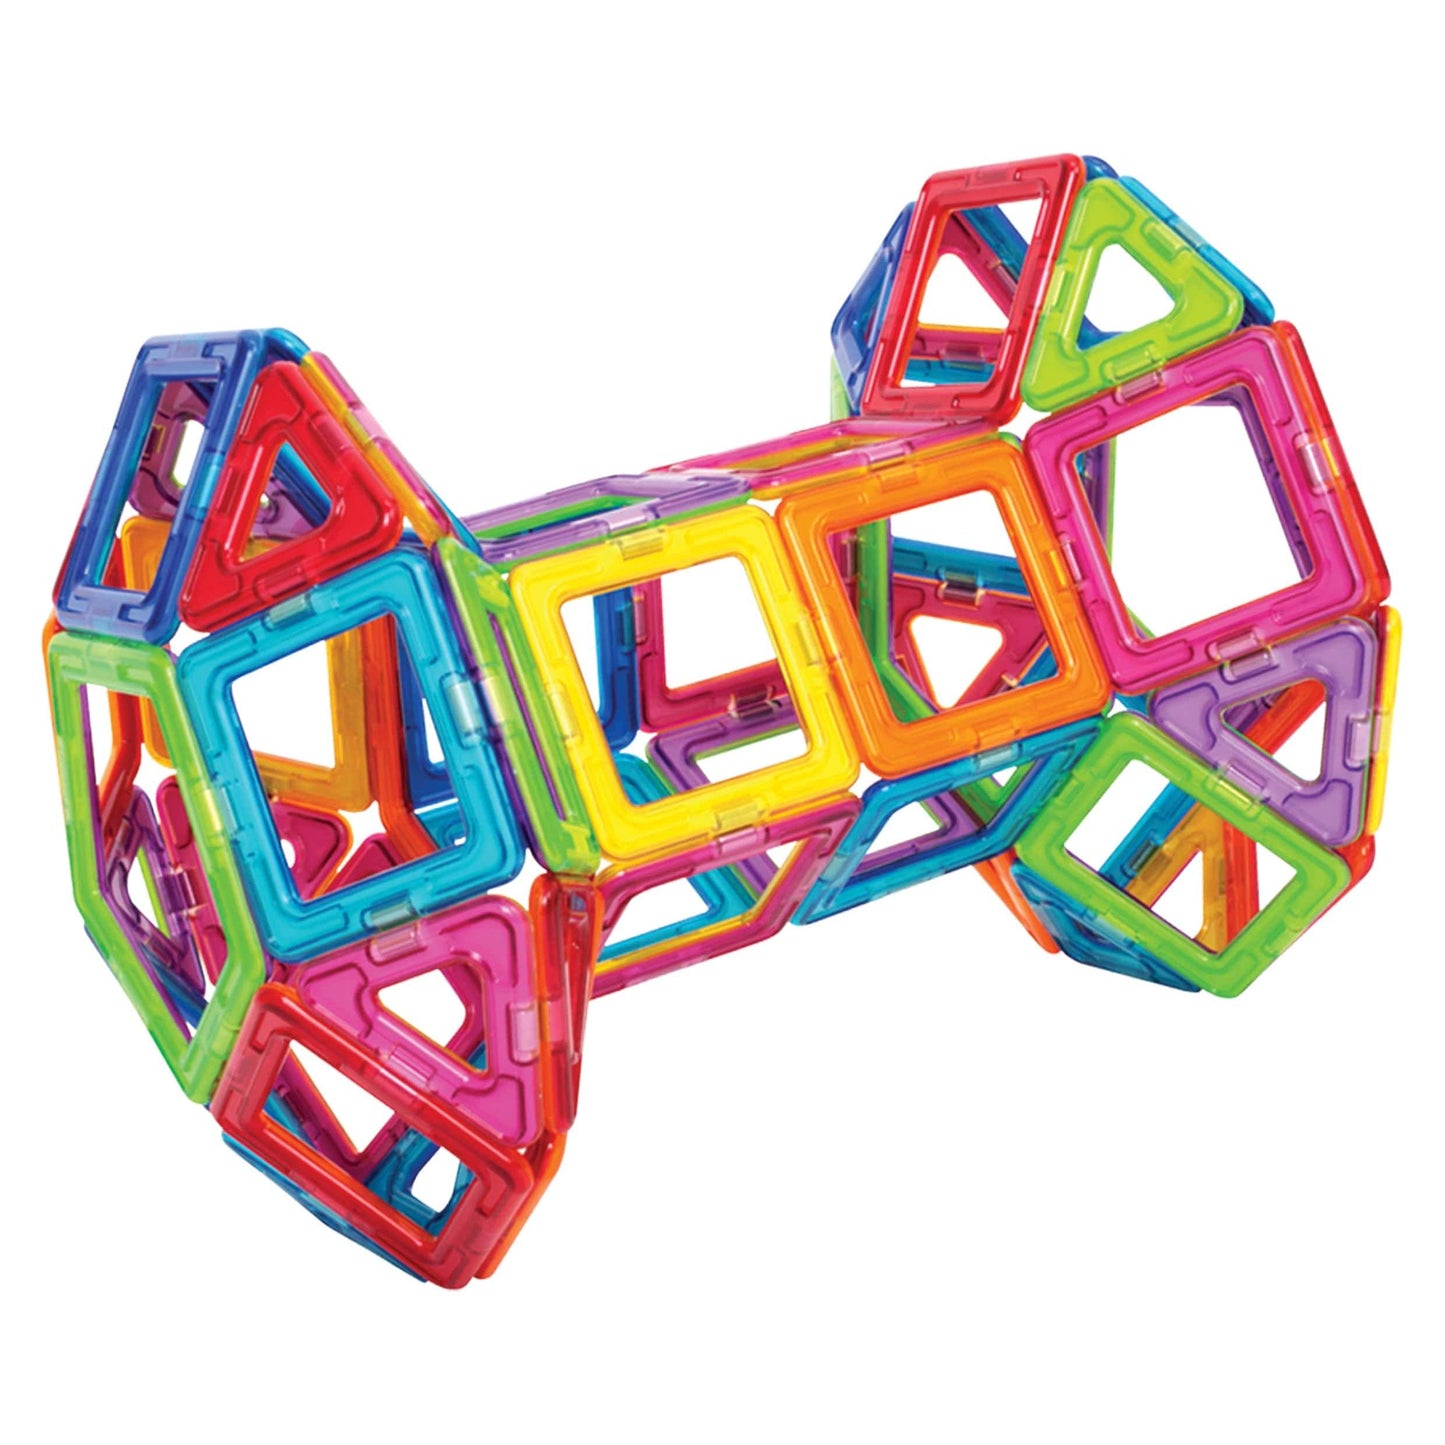 large shape made from Magformers construction toy 62 Piece Set